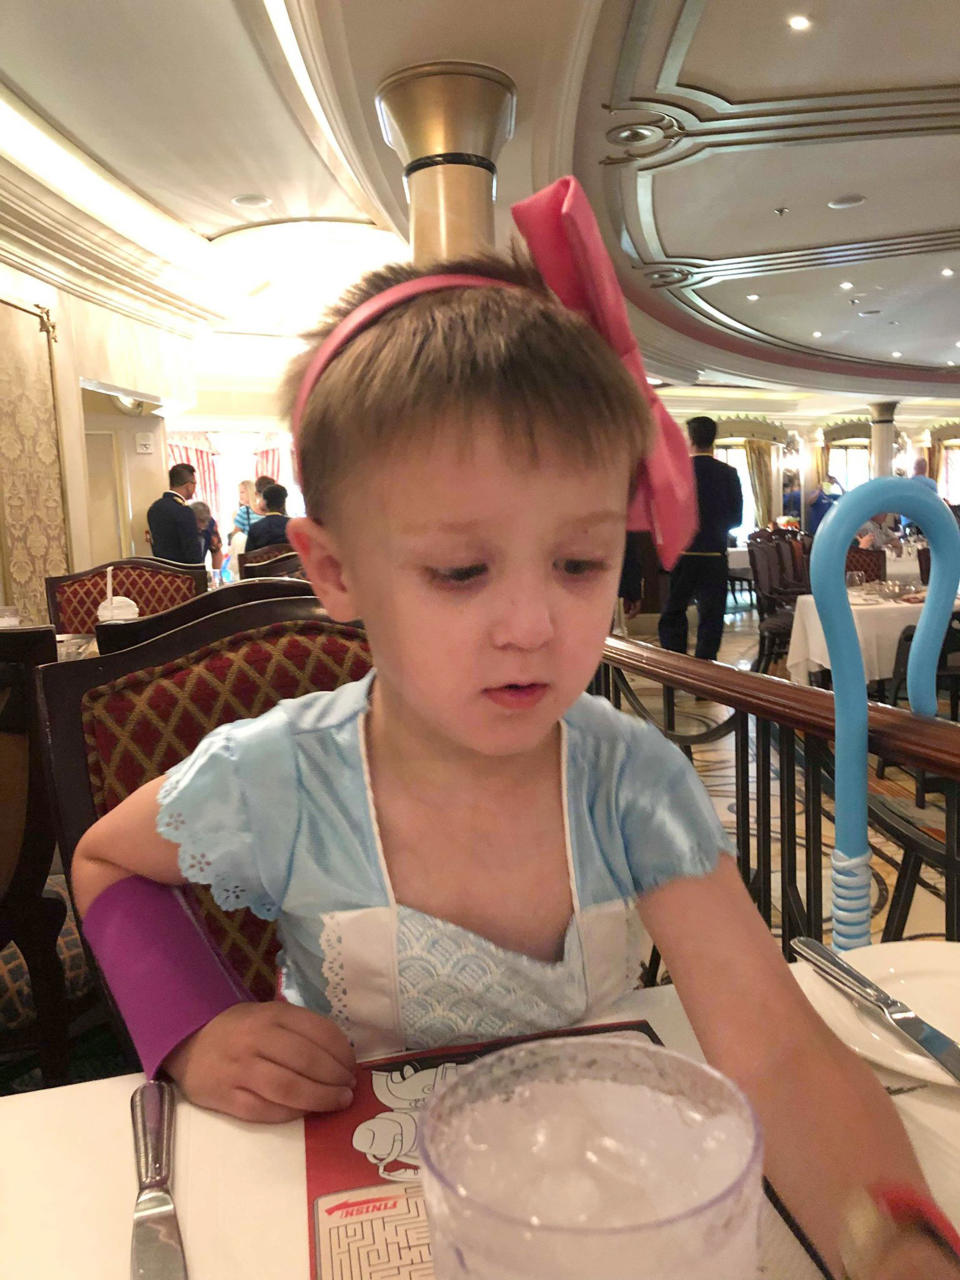 Jameson's mum has spoken out about how she was 'accused of trying to make son gay' after allowing him to wear dresses and buying him princess shirts. [Photo: Caters]